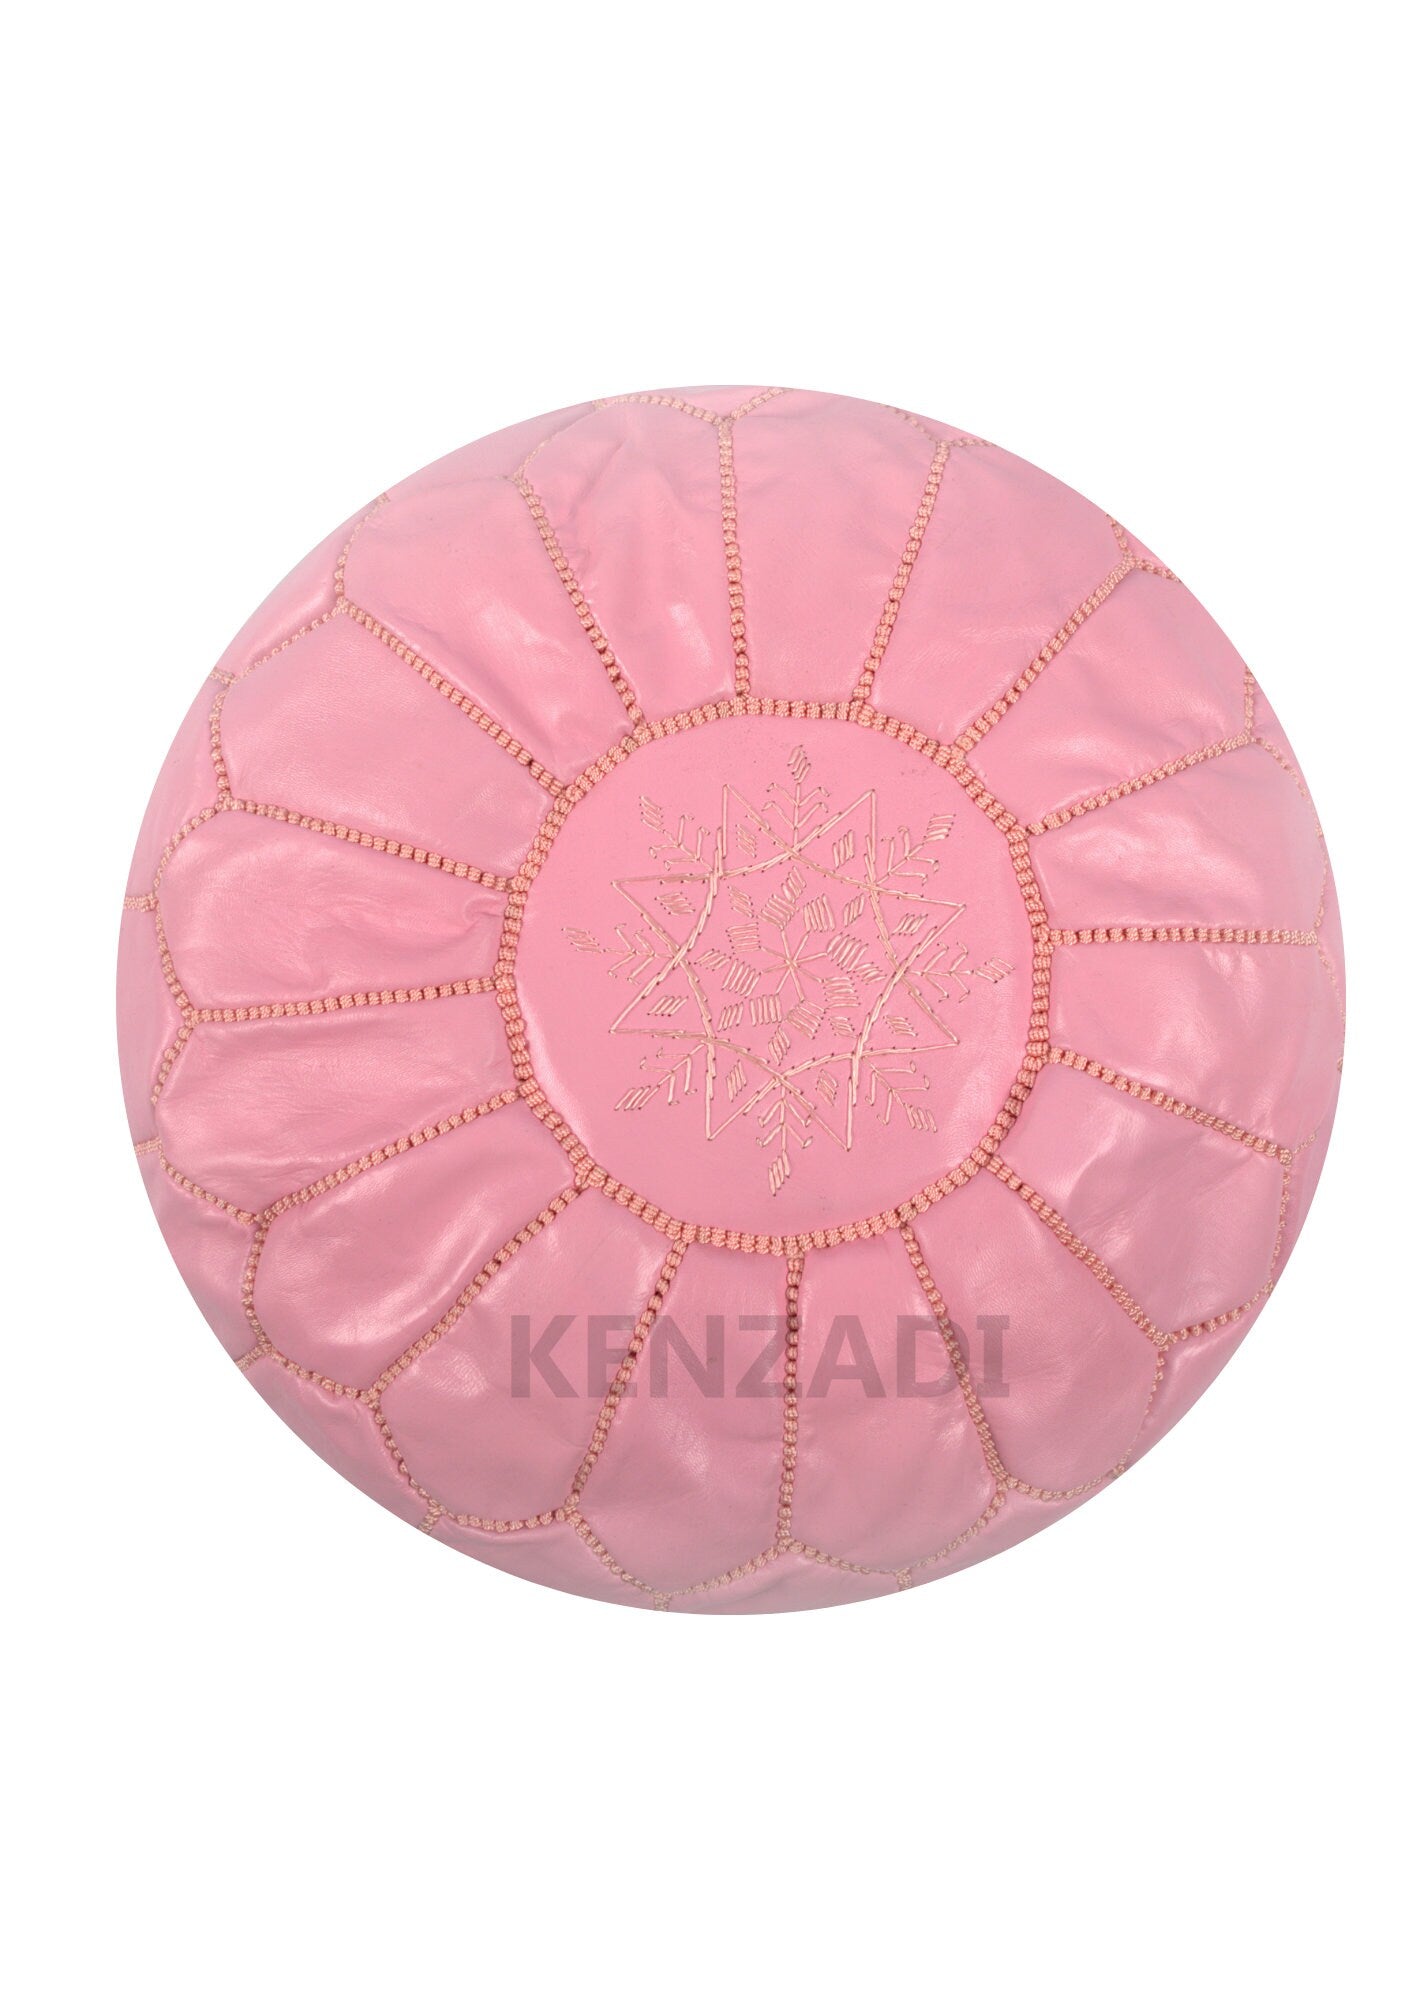 Authentic Moroccan pouf in light pink with pink embroidery, made from premium Berber leather.